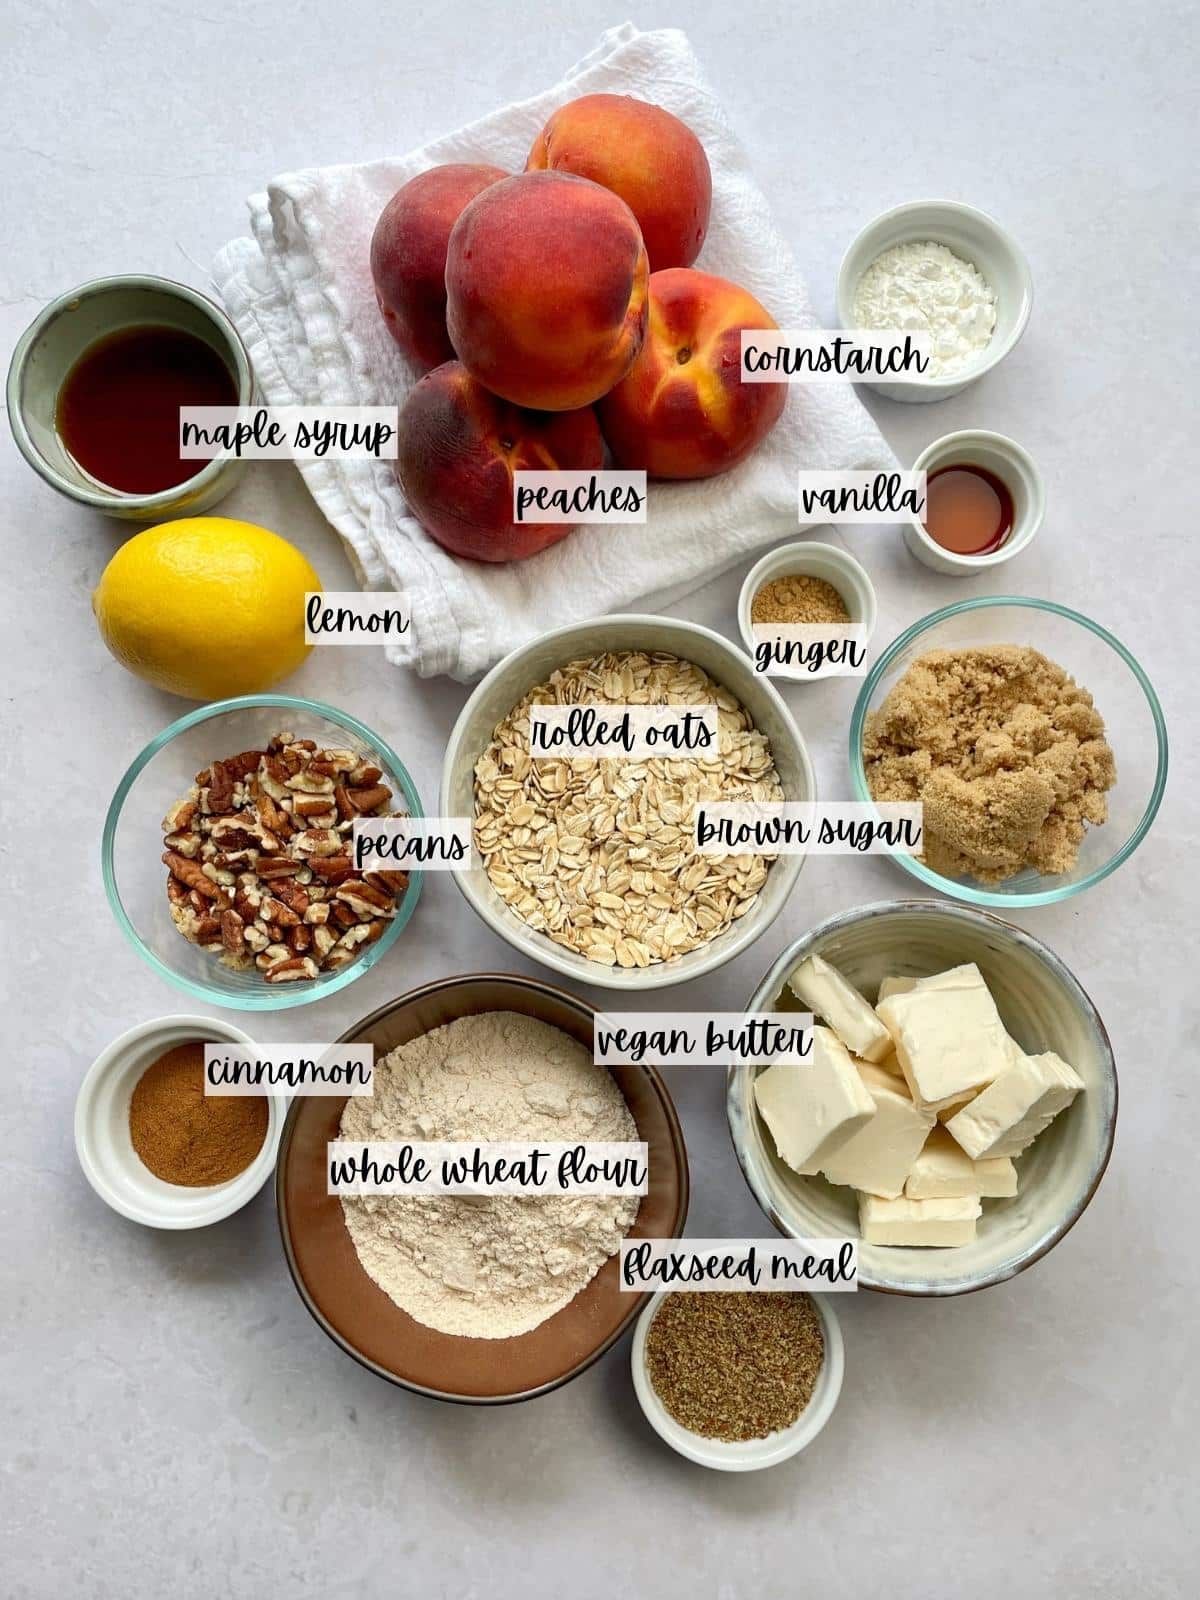 Labeled ingredients for peach crisp.